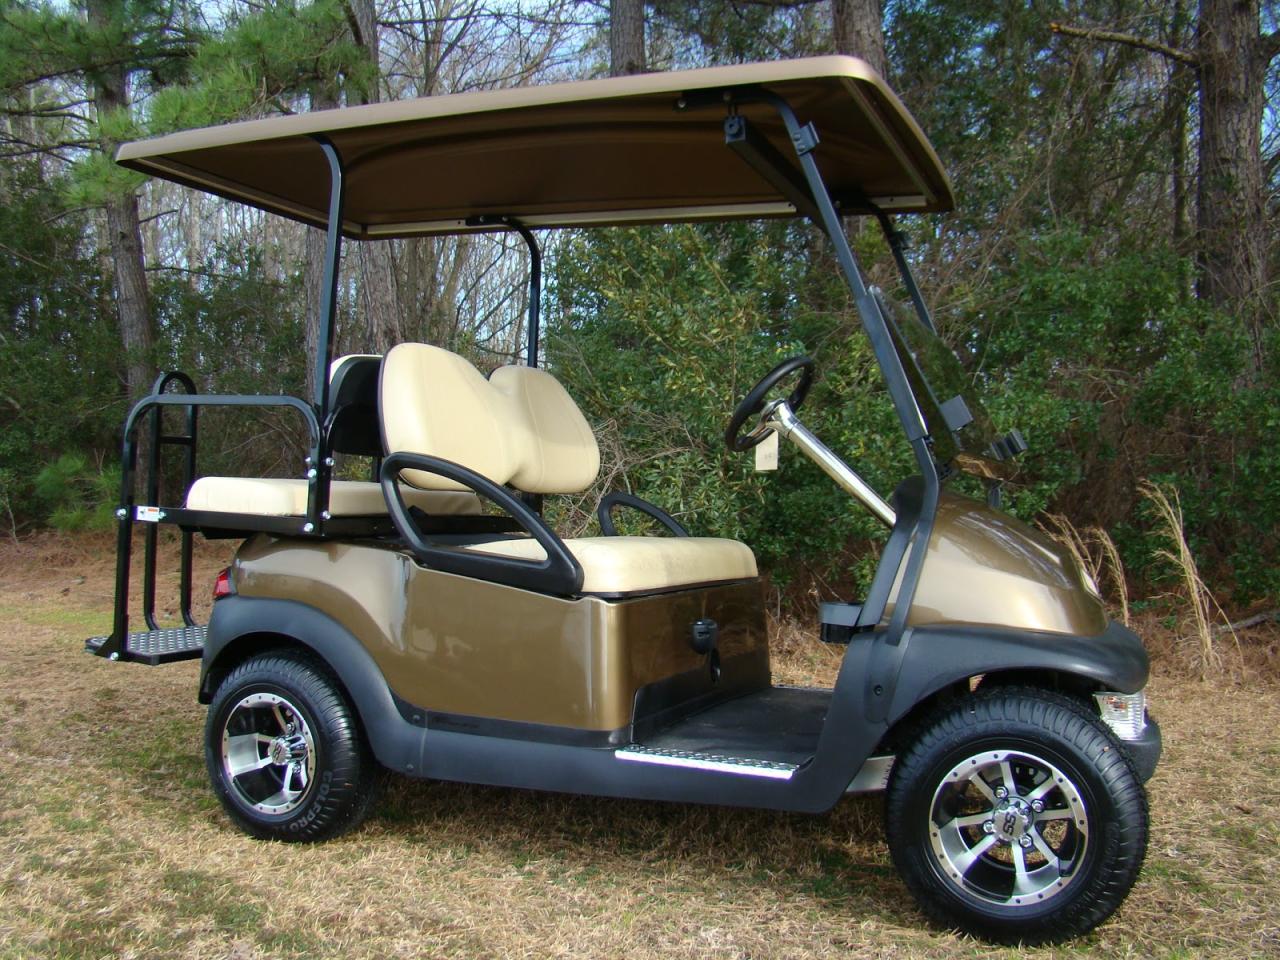 Discover Used Golf Carts for Sale by Owner in Alpena, Michigan: Your Ride to Adventure